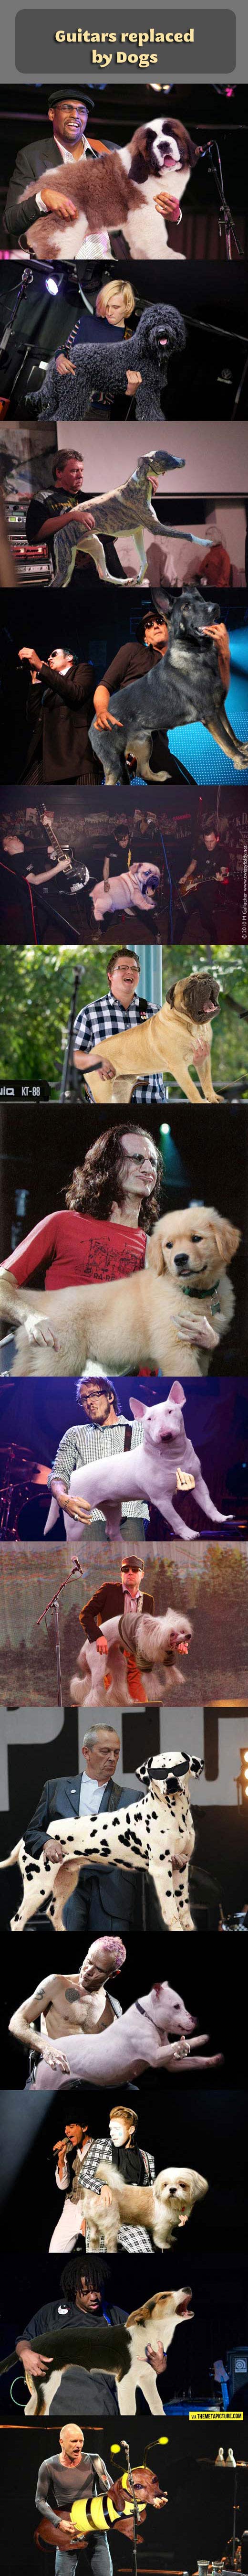 Guitars replaced by dogs…